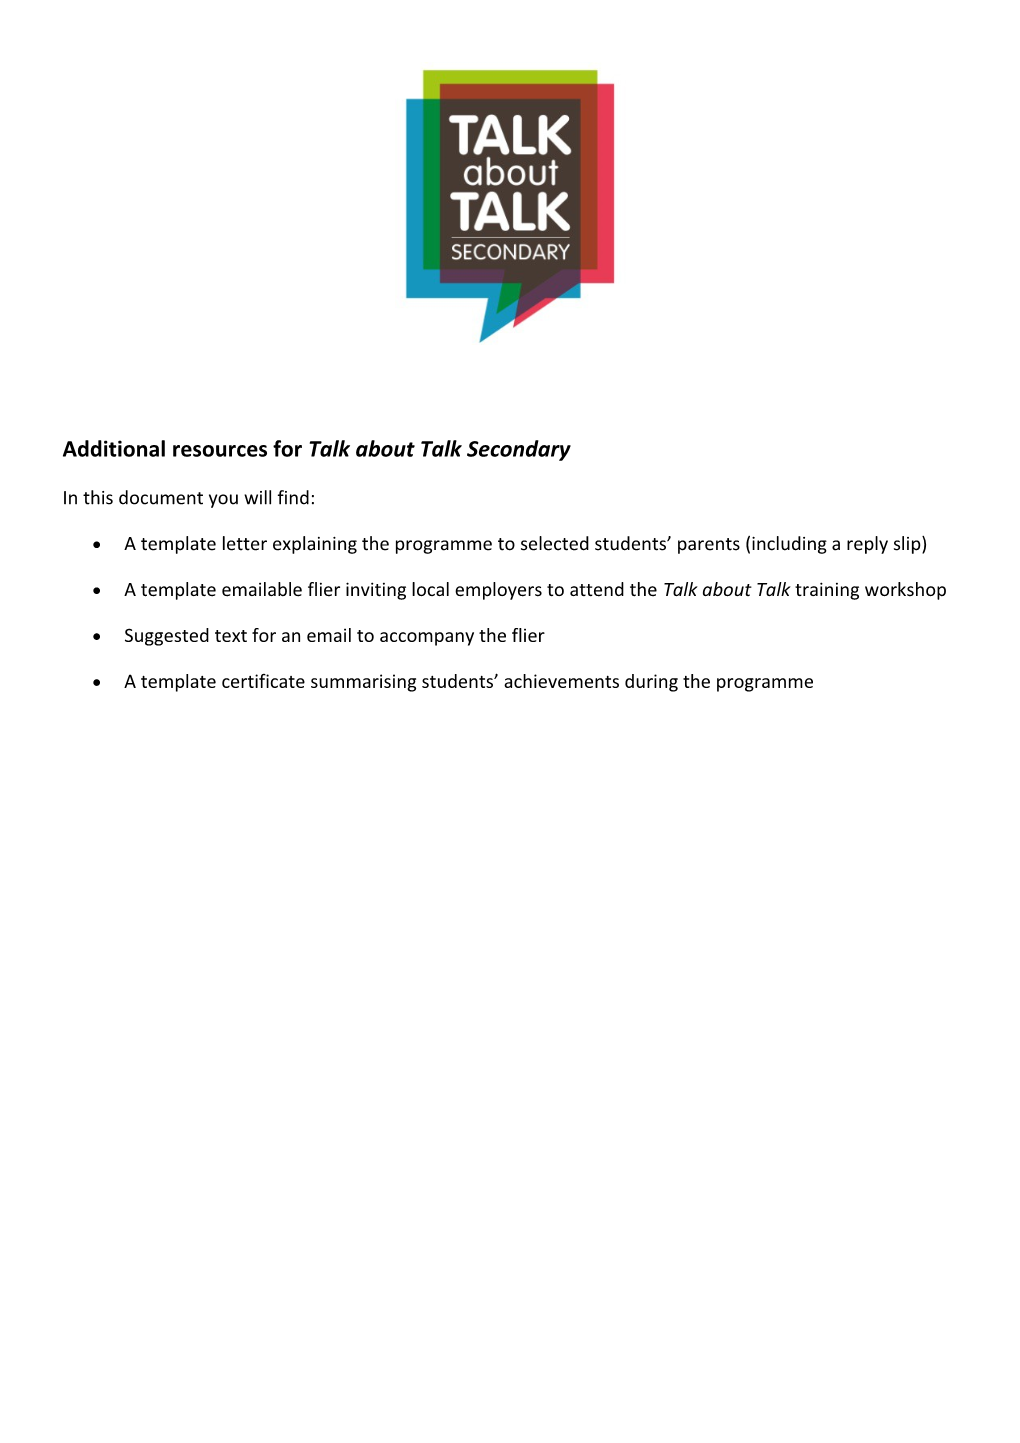 Additional Resources for Talk About Talk Secondary